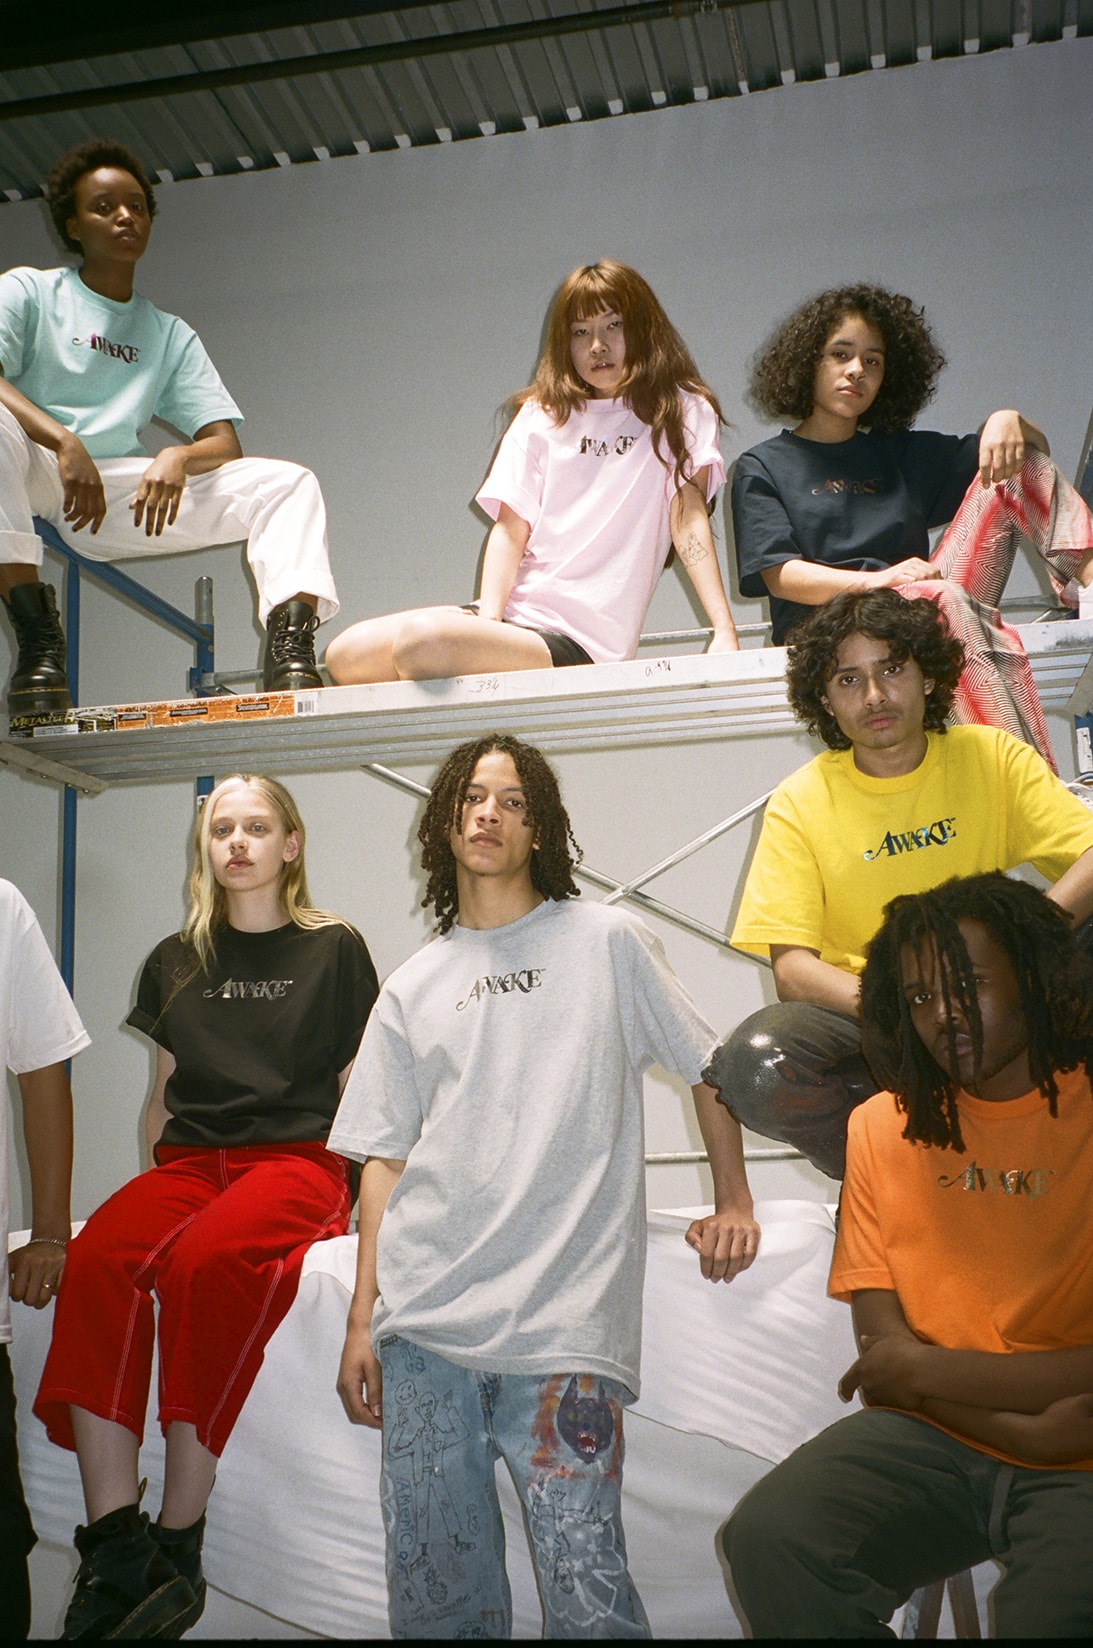 Awake NY Spring Summer 2018 Lookbook collection may release date info drop